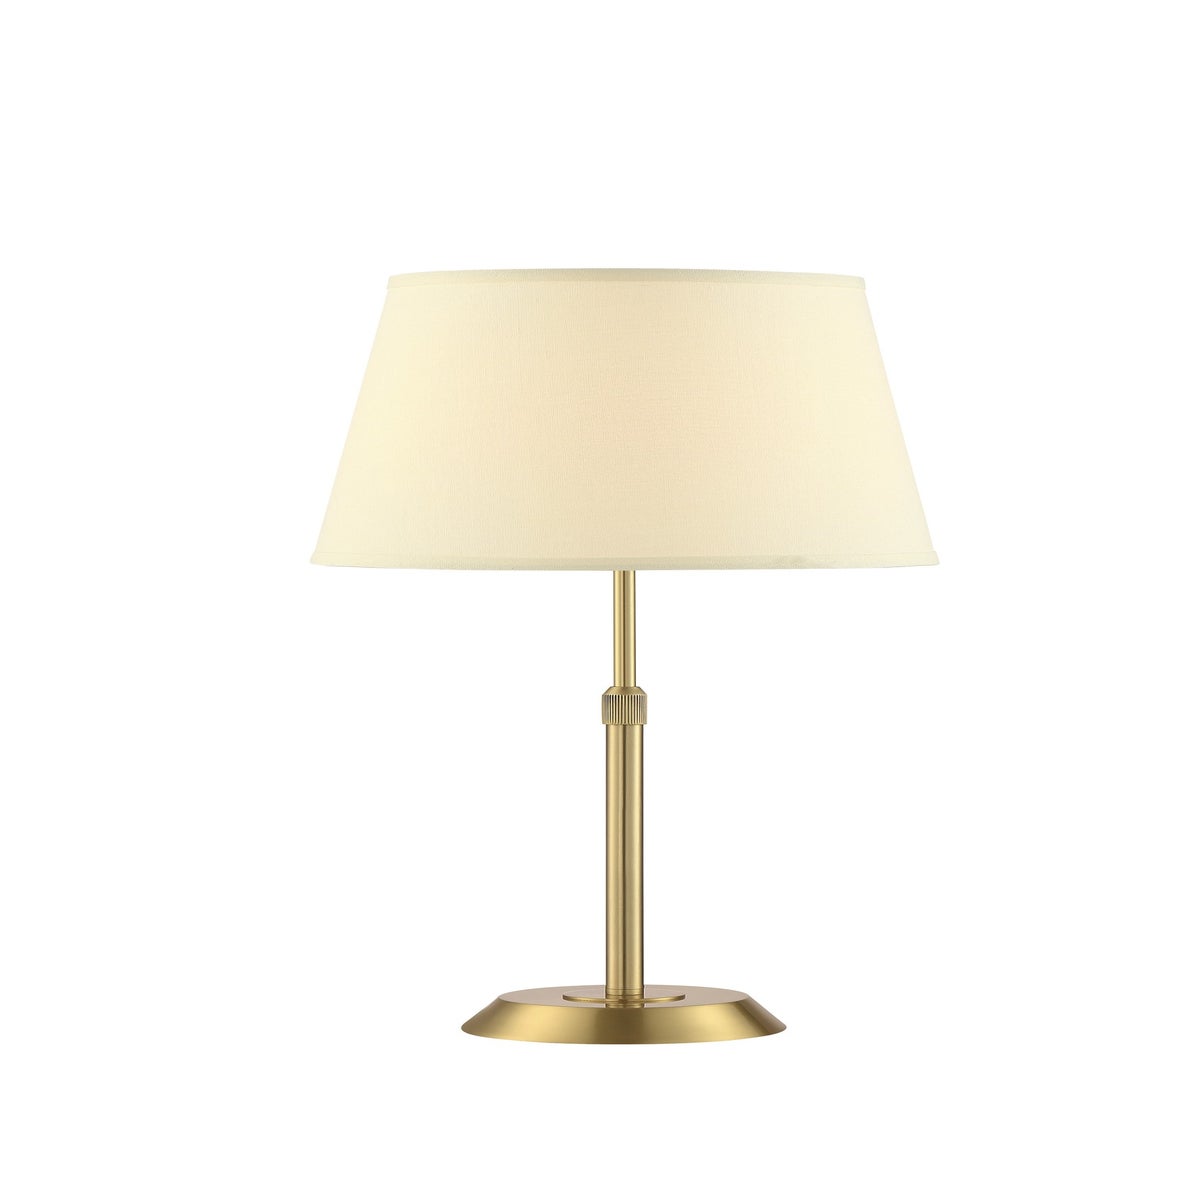 Attendorn Table Lamp with 2 Shades in Satin Brass - table lamps